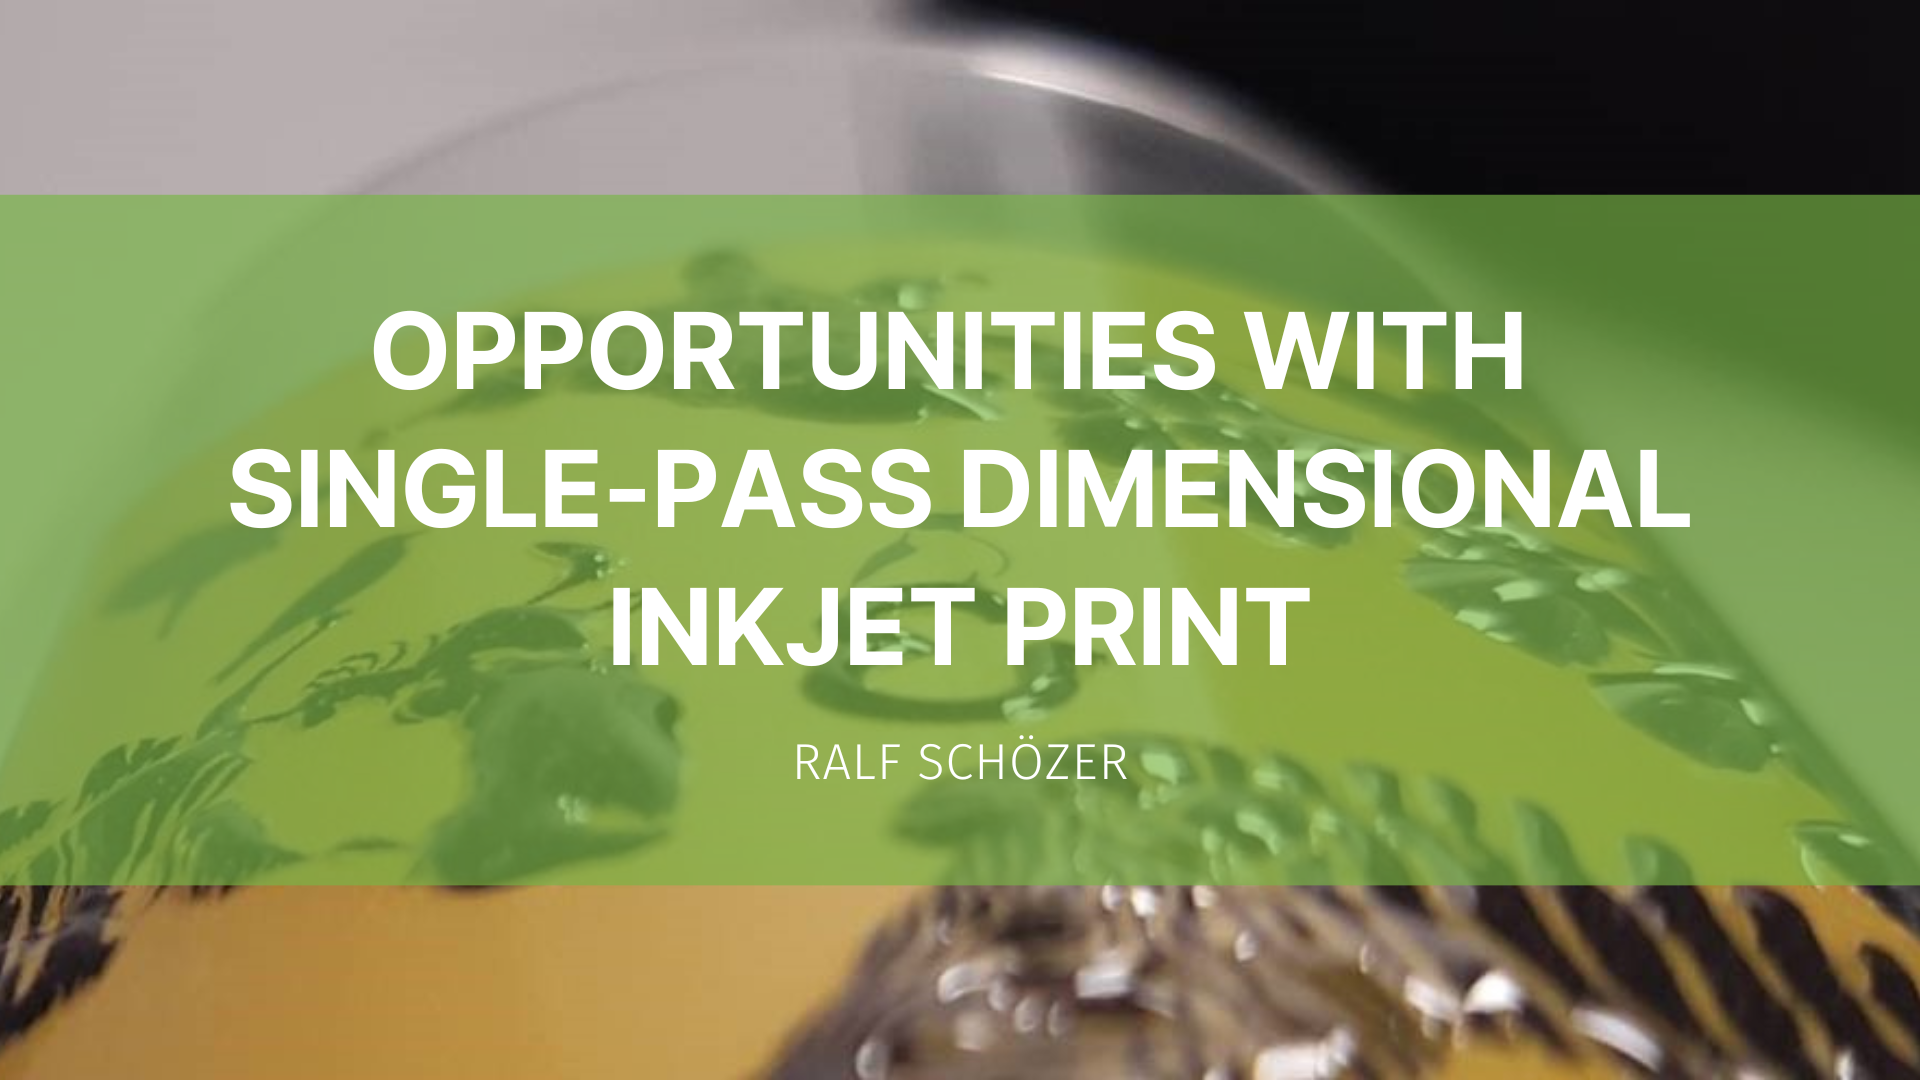 Featured image for “Opportunities with single-pass dimensional inkjet print”